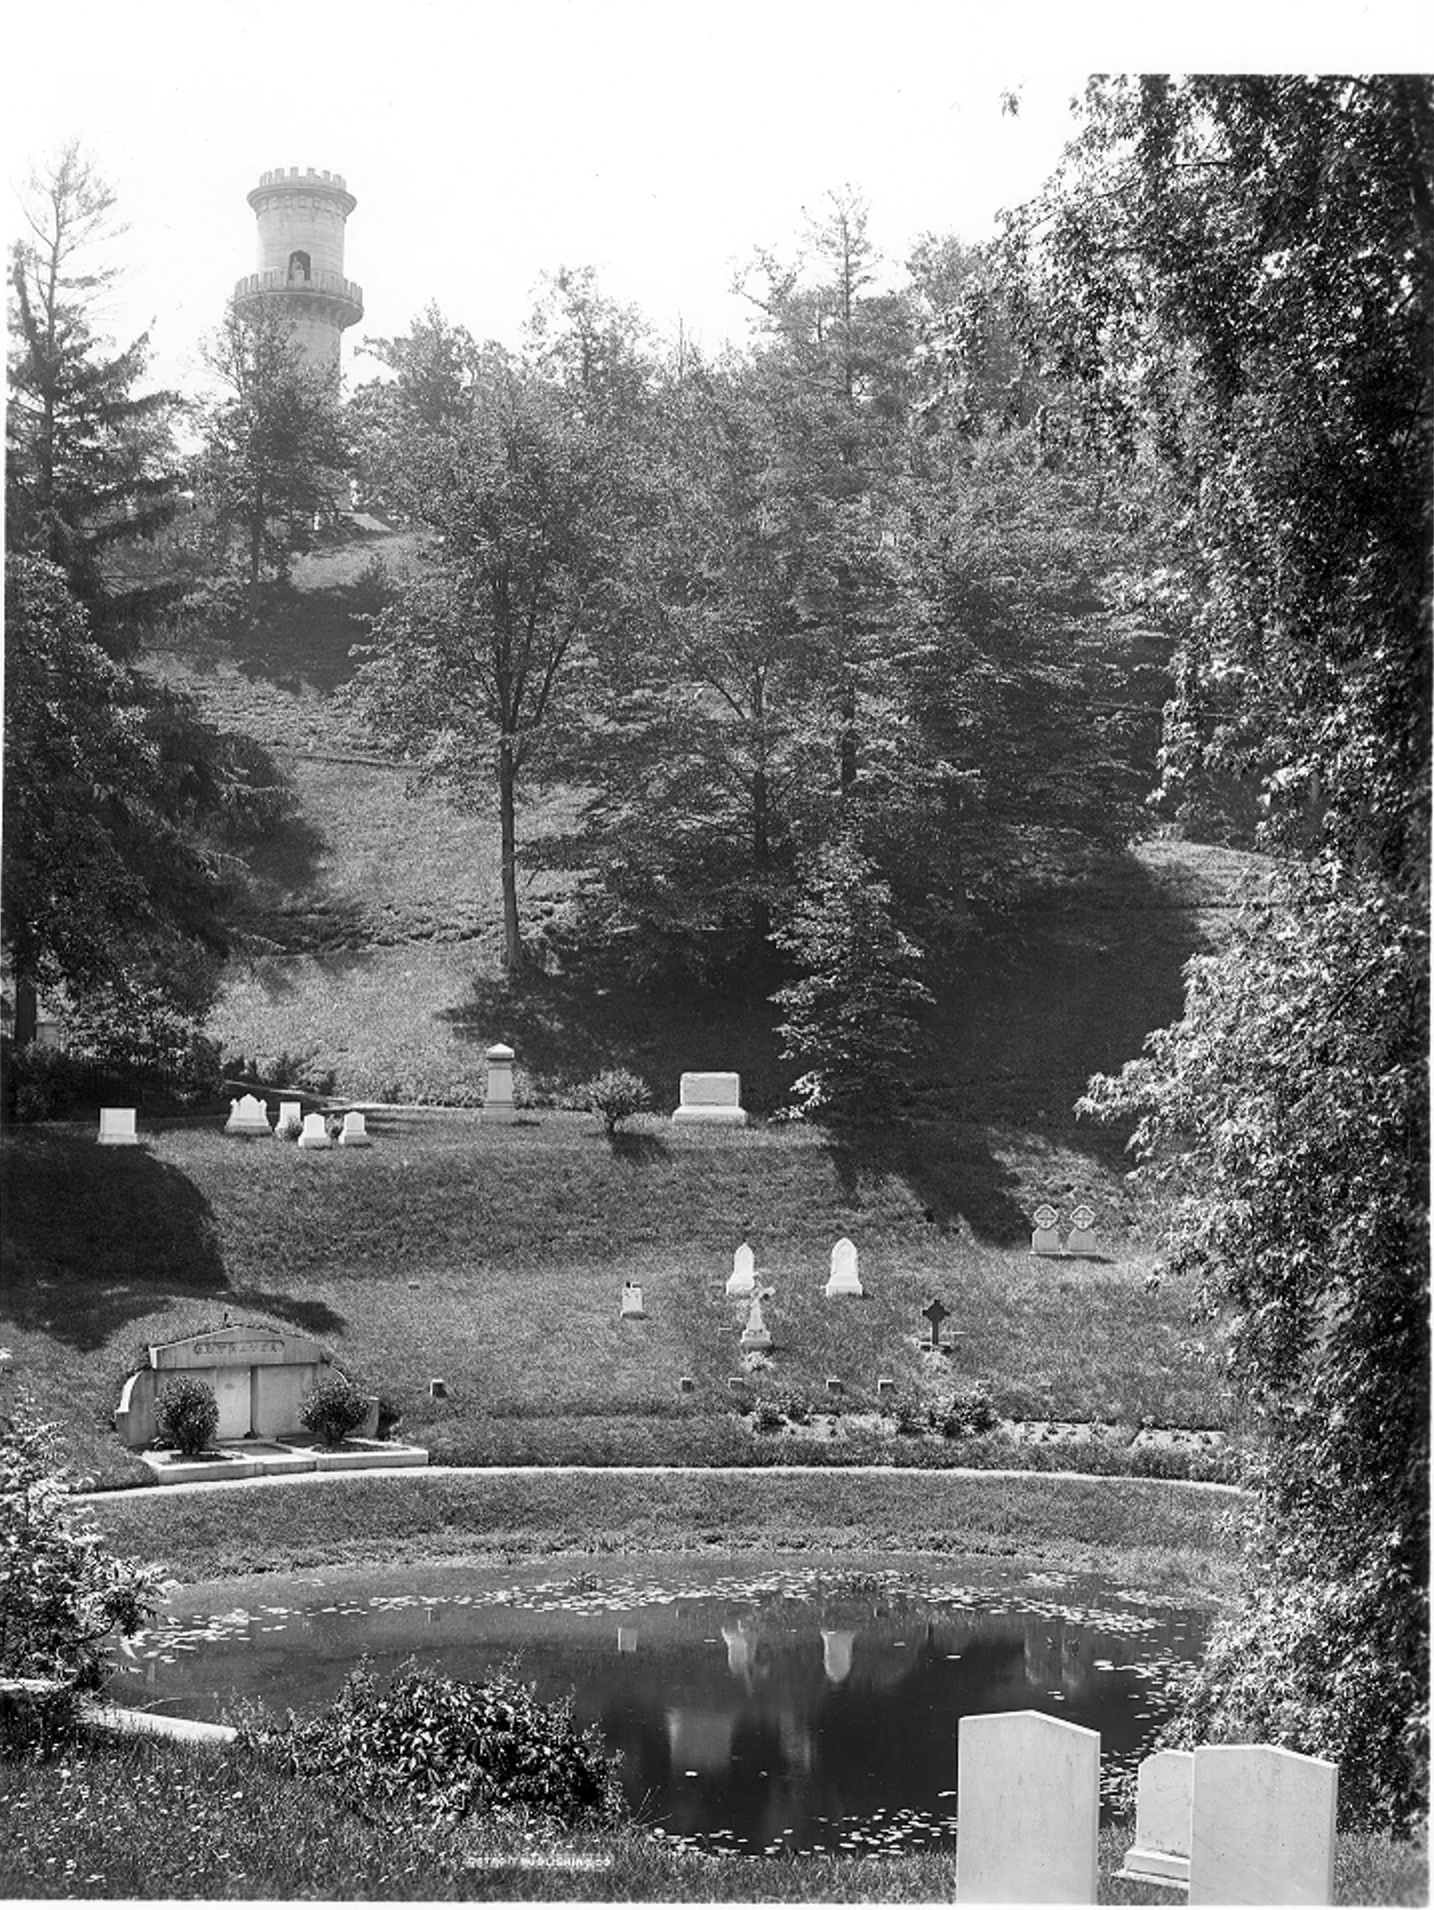 A black and white photograph of a cemetery with a view to a granite tower on the hill.